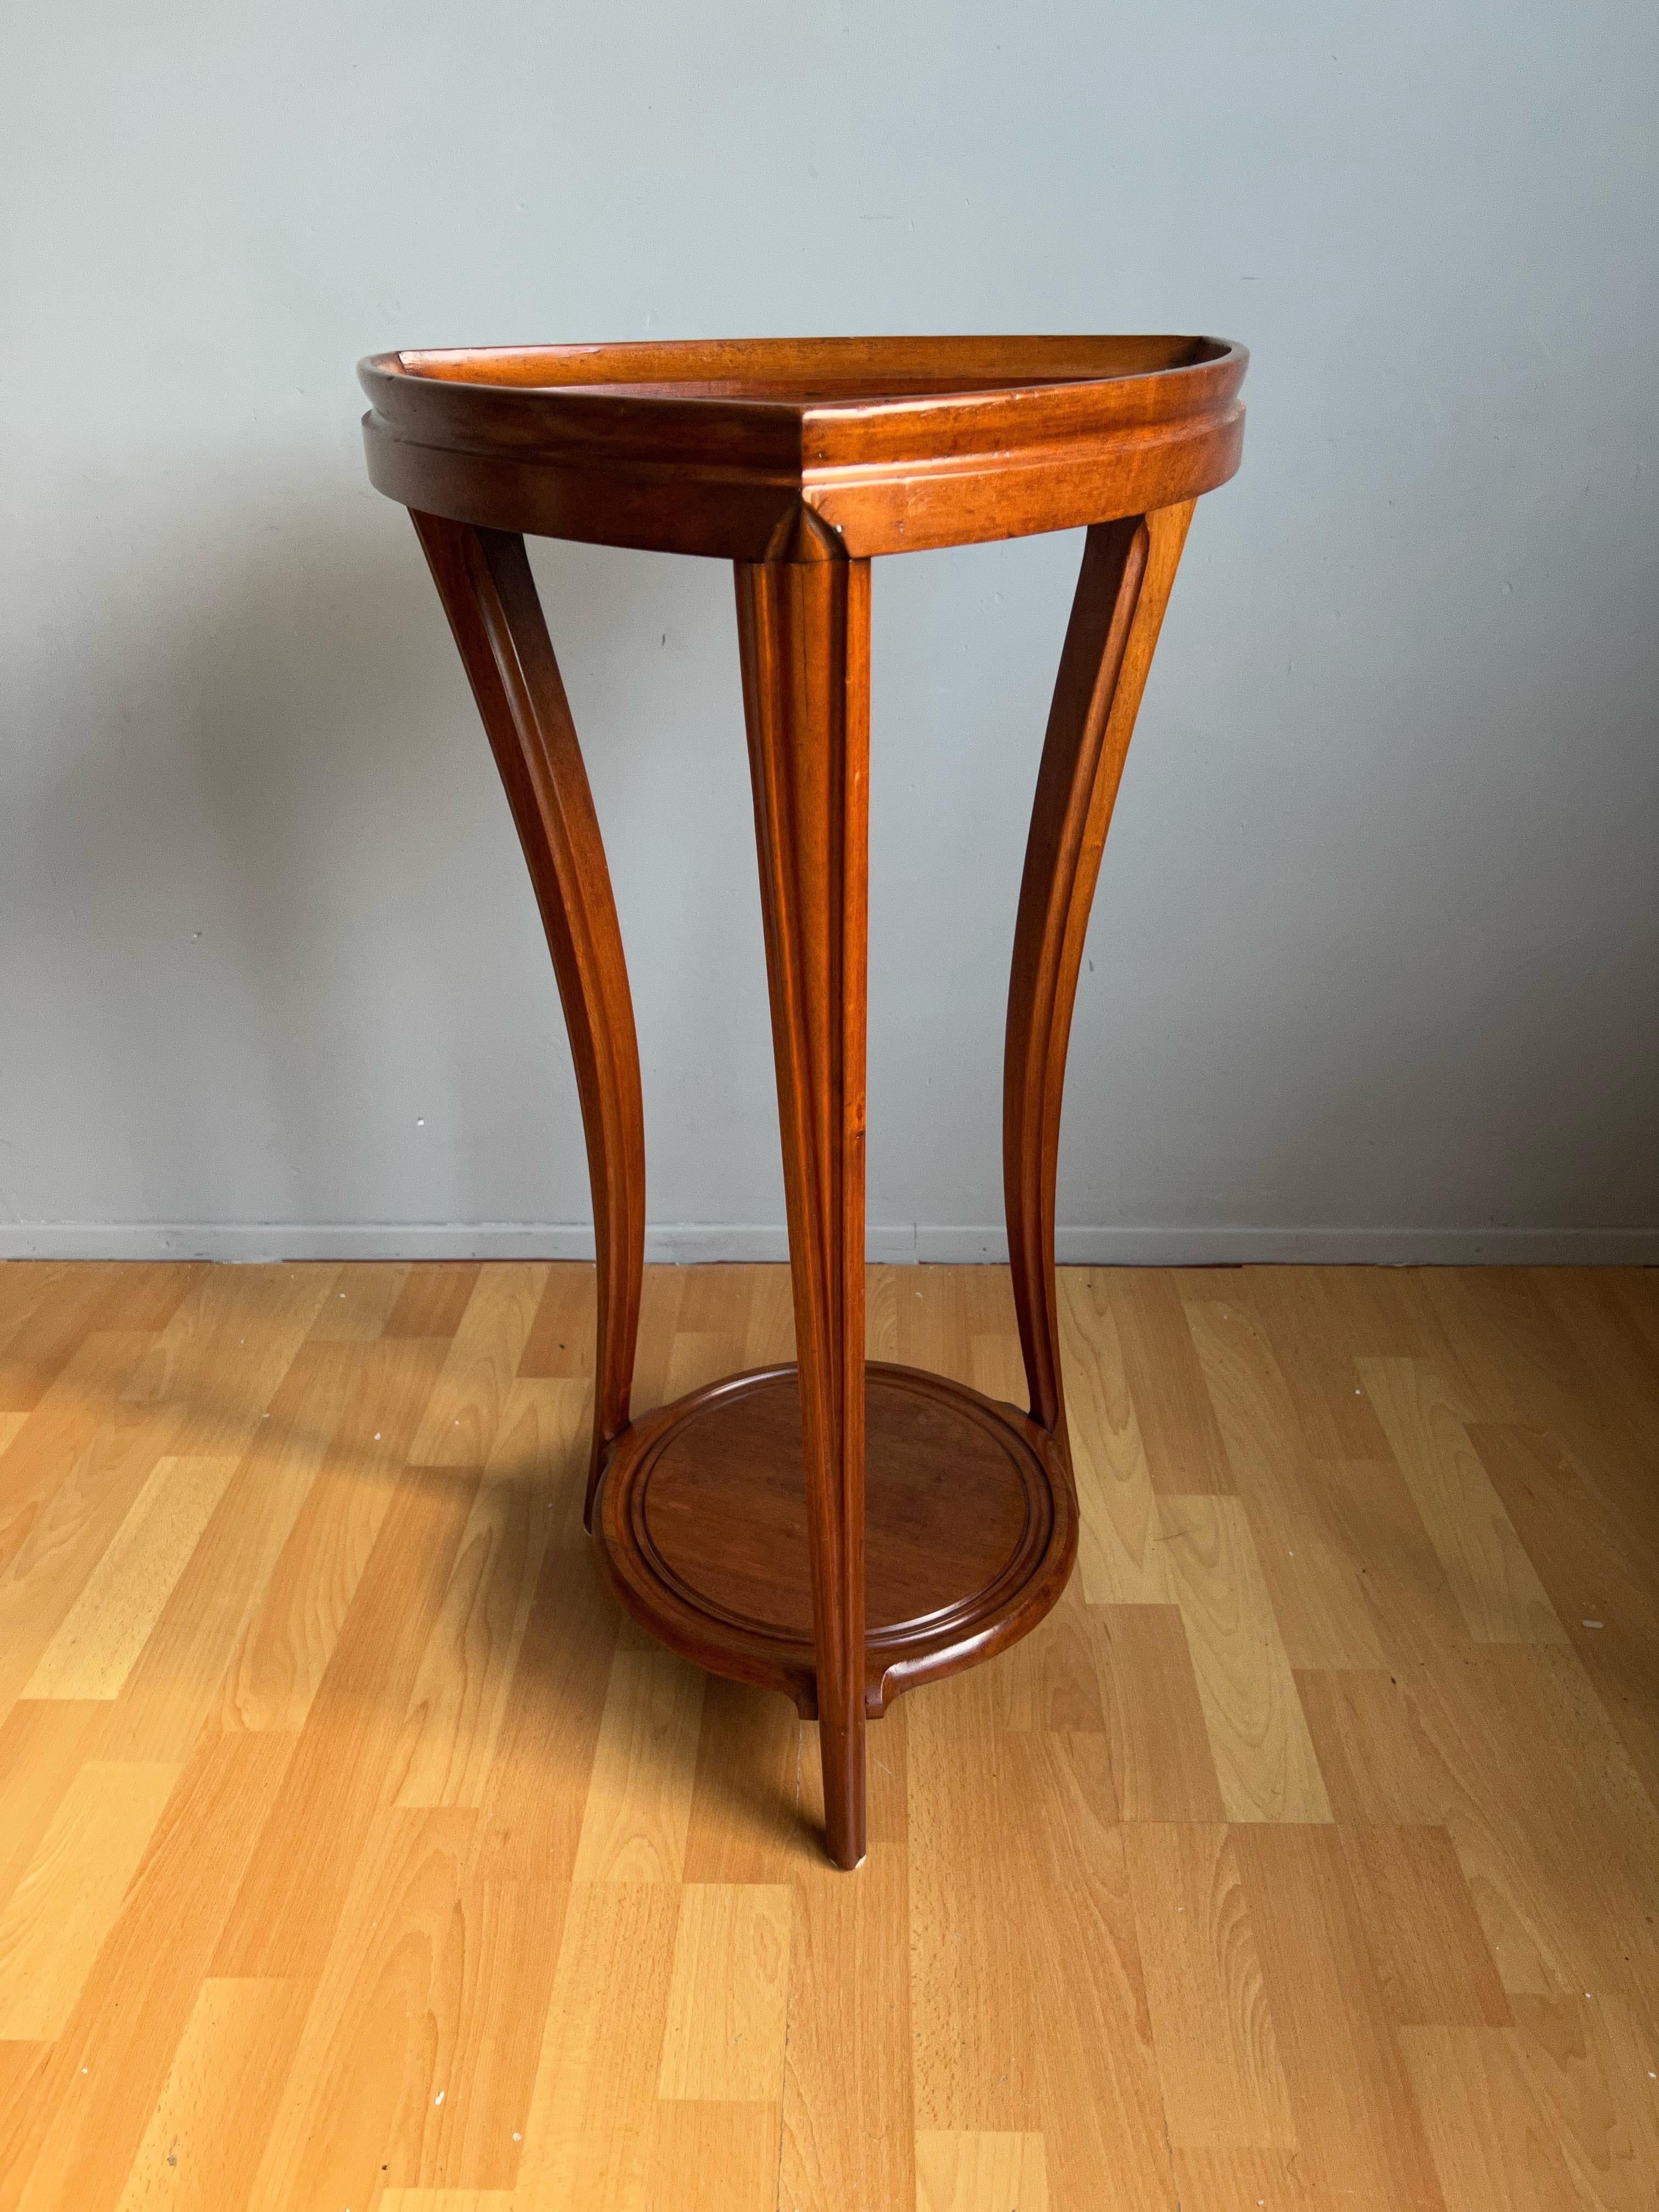 Beautiful, multipurpose, Art Nouvea table from early twentieth century France.

This elegant, truly stylish and triangle design table from early 1900s France is entirely hand-crafted out of solid nutwood. If this table is not attributed to Louis